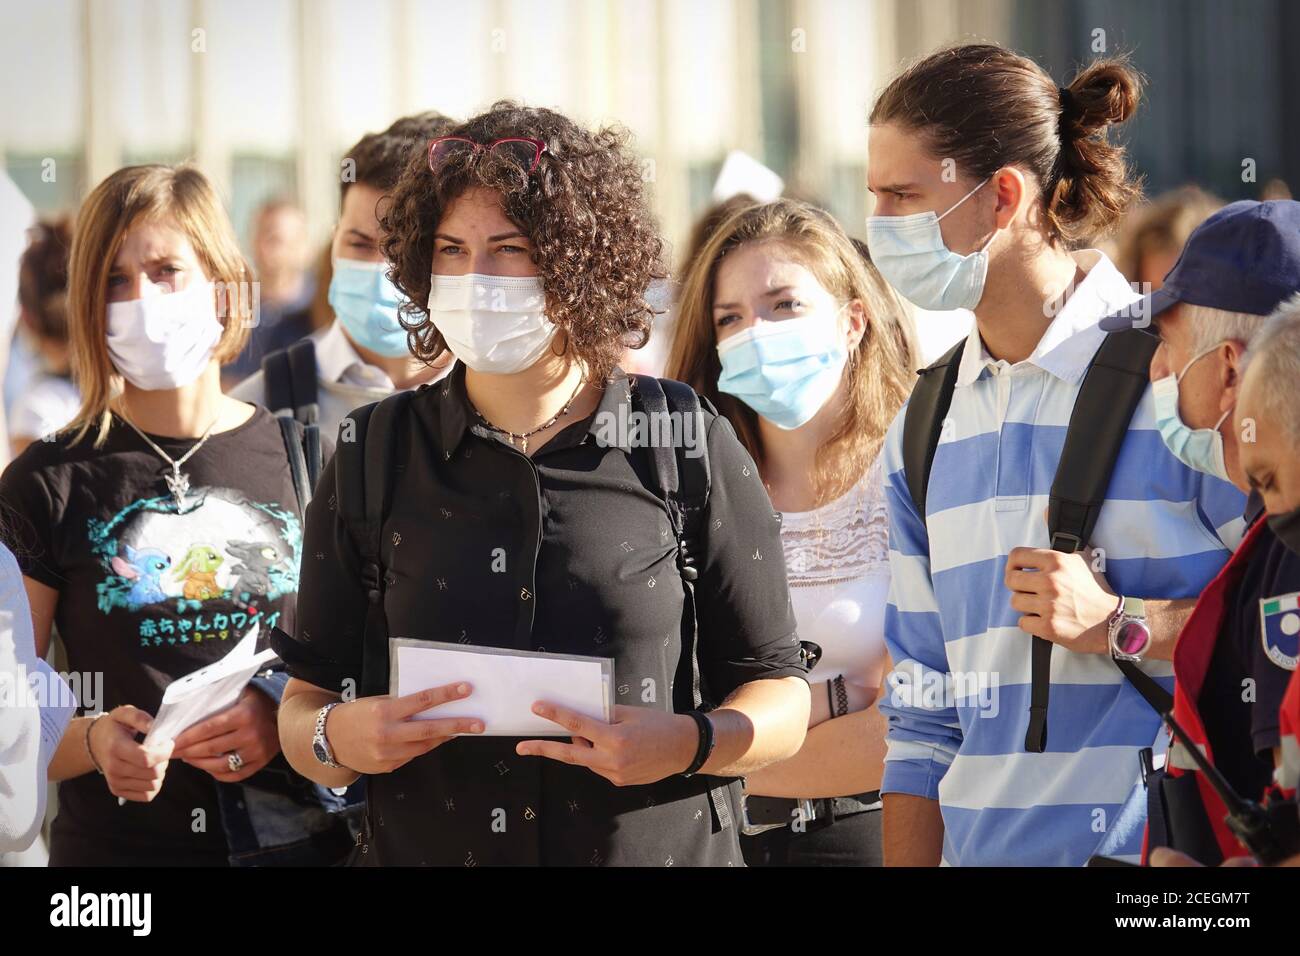 Students queuing at the school entrance wearing mask face to prevent infection or respiratory illness. Turin, Italy - September 2020 Stock Photo